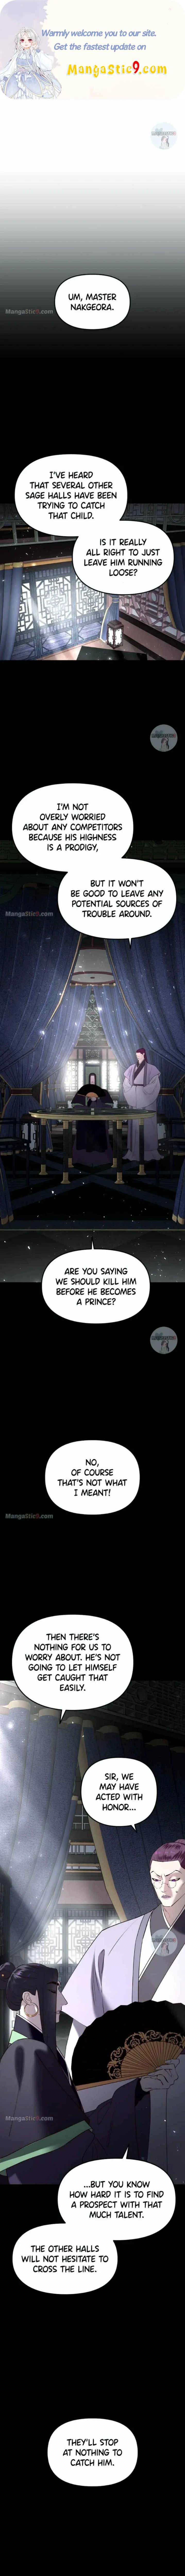 The Prince Of Myeolyeong - Page 2